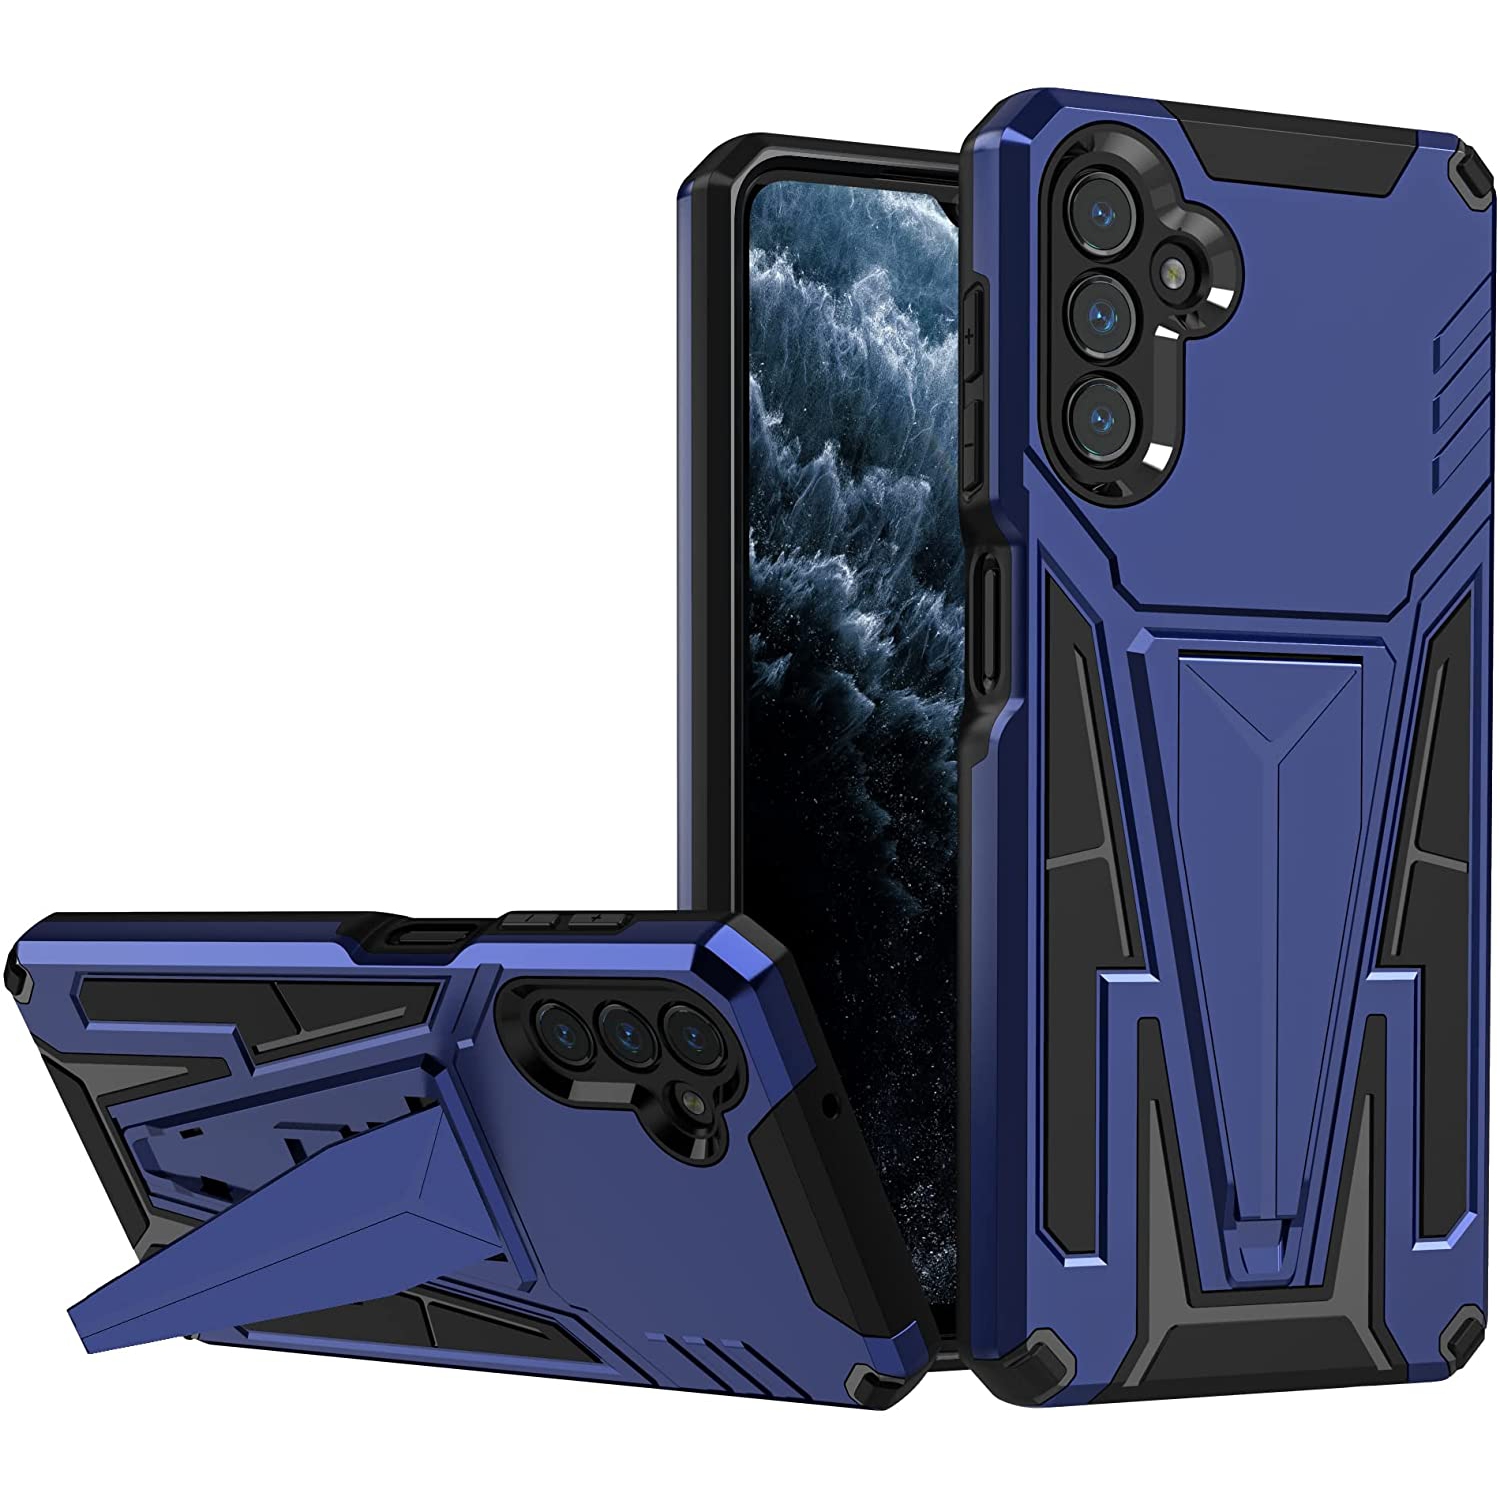 【CSmart】 Shockproof Heavy Duty Rugged Defender Hard Case Kickstand Cover for Samsung Galaxy A32 5G, Blue